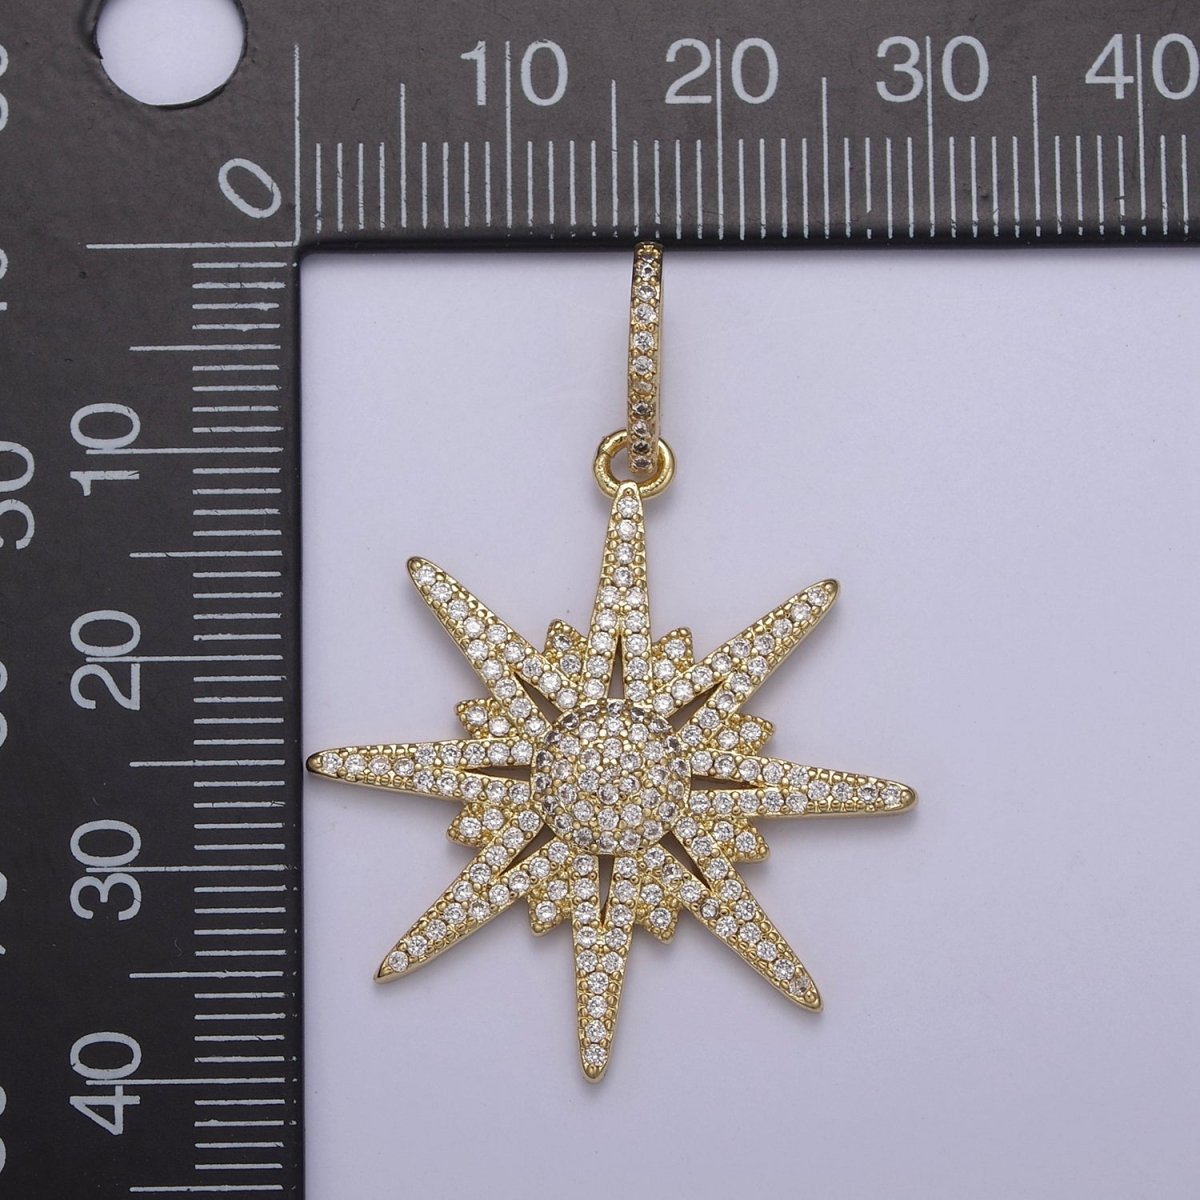 14K Gold Filled Northern Star Pendant Charm, Micro Pave Celestial Statement Pendant For Jewelry Necklace Supply Component H-808 - DLUXCA